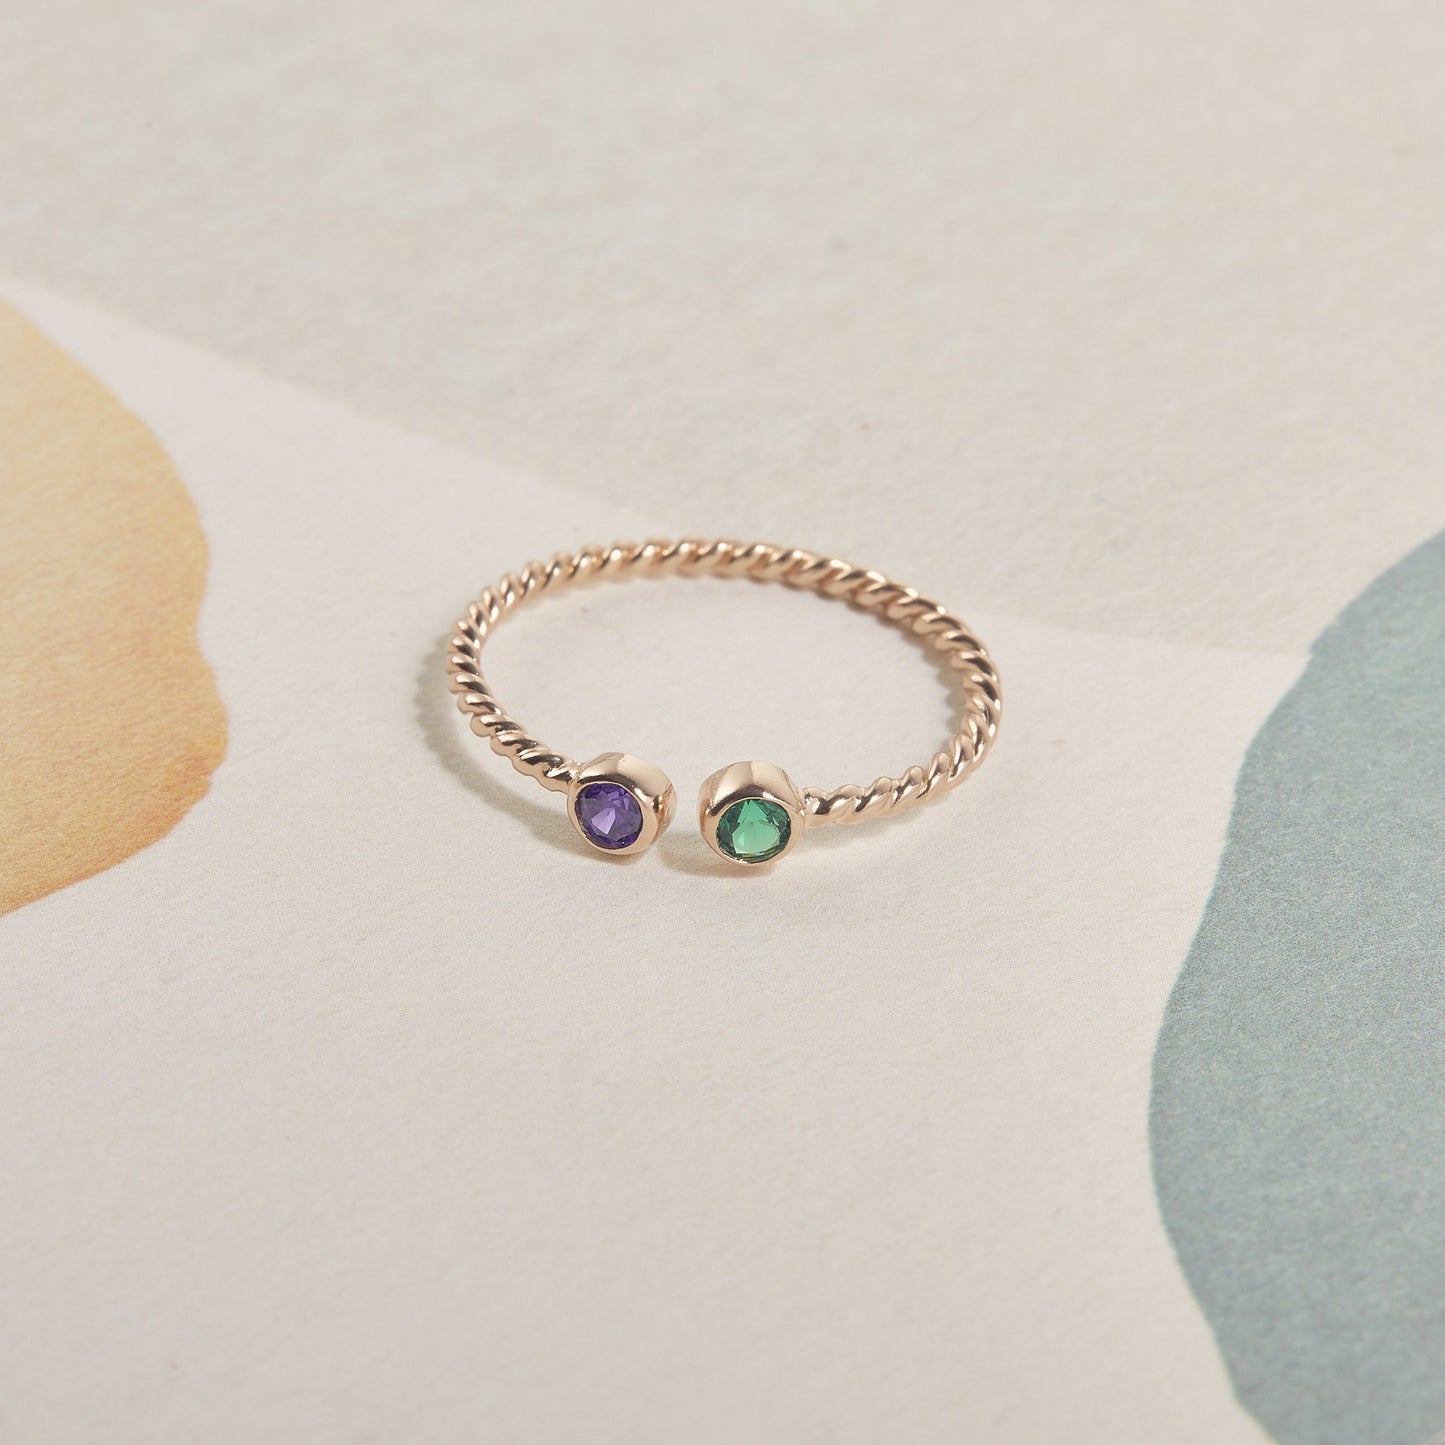 Dainty Promise Ring | Birthstone Jewelry | Personalized Stackable Ring | Dual Birthstone Ring | Gemstone Ring | Stacking Ring | Family Ring